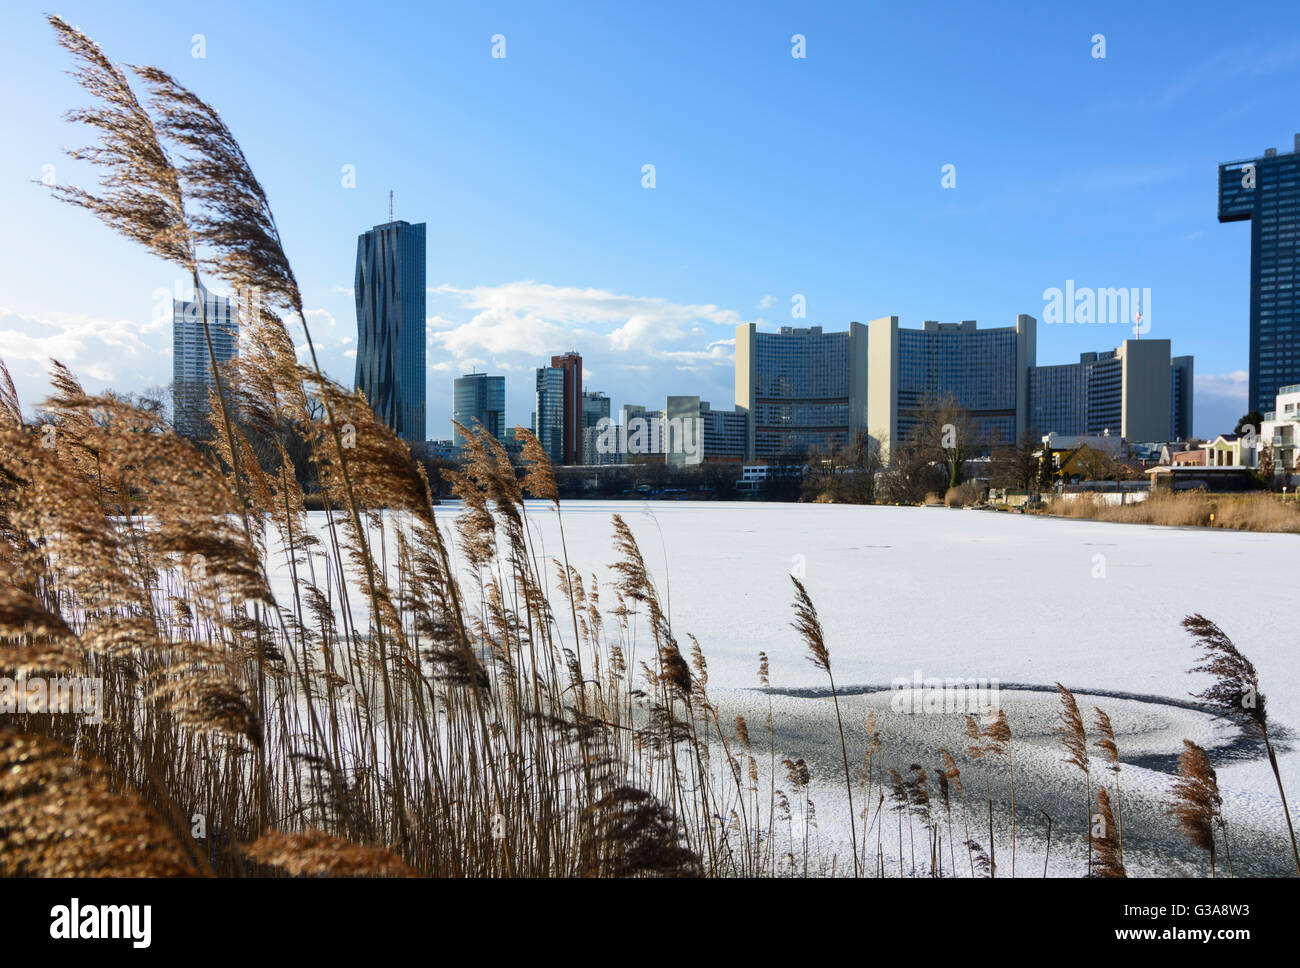 lake Kaiserwasser with ice and snow , behind the DC Tower 1 and the UN building, Austria, Wien, 22., Wien, Vienna Stock Photo